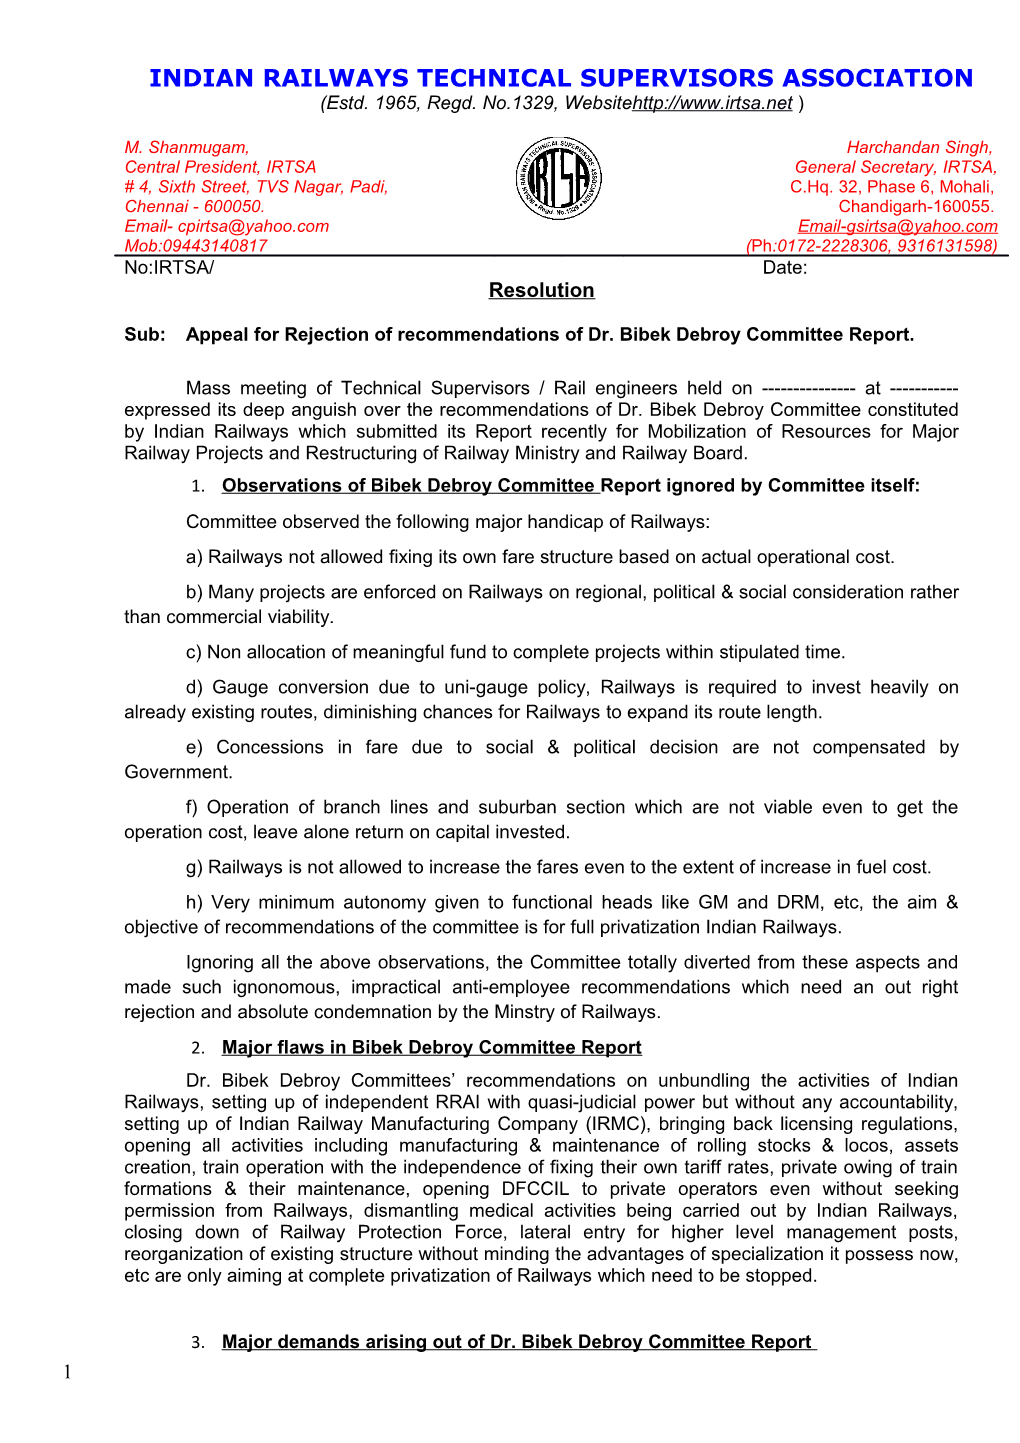 Sub: Appeal for Rejection of Recommendations of Dr. Bibekdebroy Committee Report